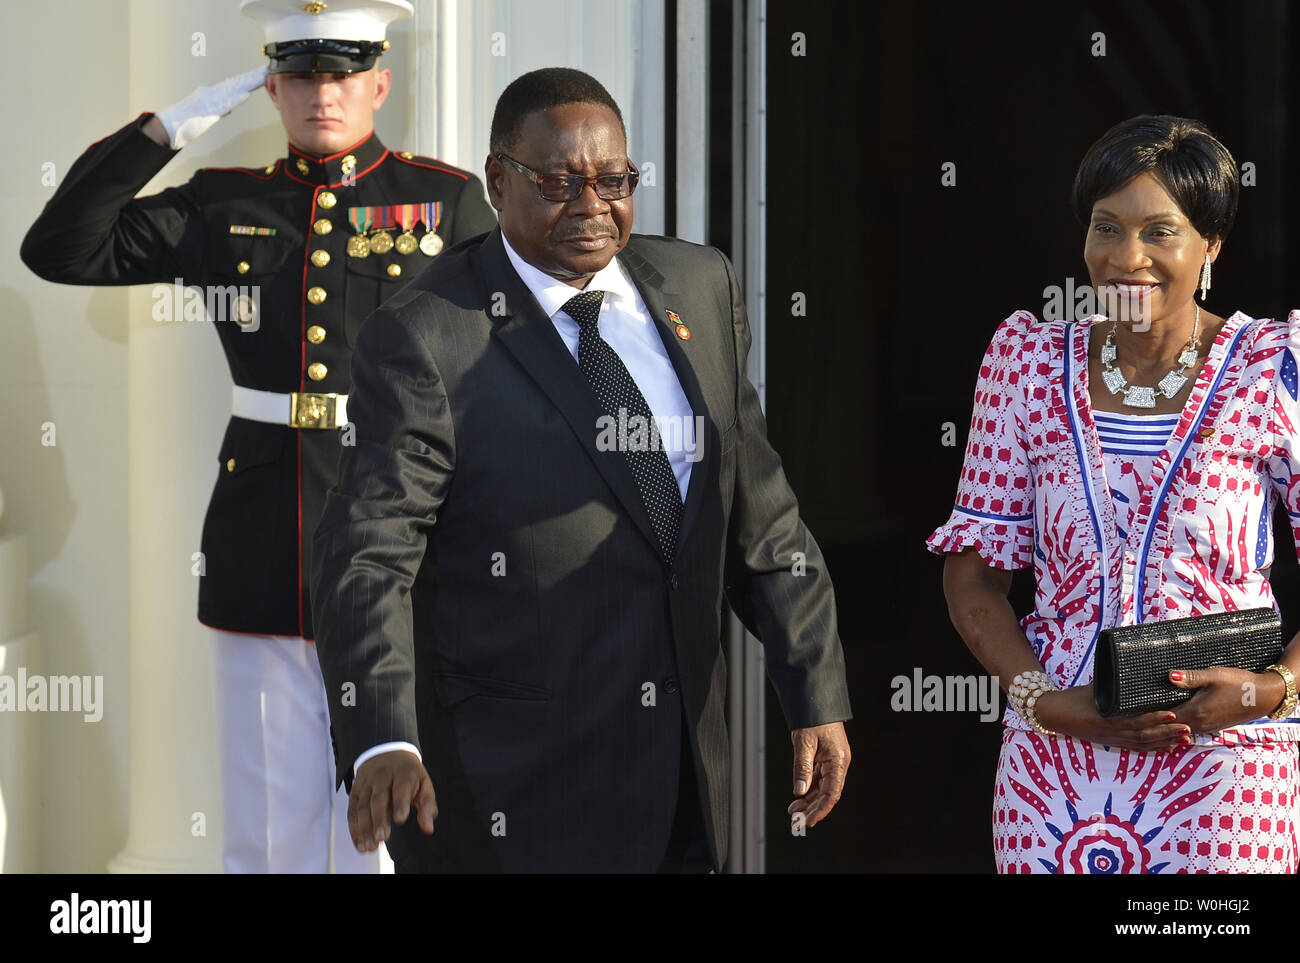 Malawi's President Arthur Peter Mutharika and First Lady Gertrude Hendrina Mutharika greet the press as they arrive at the White House for a State Dinner on behalf of the US-Africa Leaders Summit, August 5, 2014, in Washington, DC. Nearly 50 heads of state and government from Africa are attending the summit to advance business, agriculture, development and infrastructure interests on the continent.              UPI/Mike Theiler Stock Photo